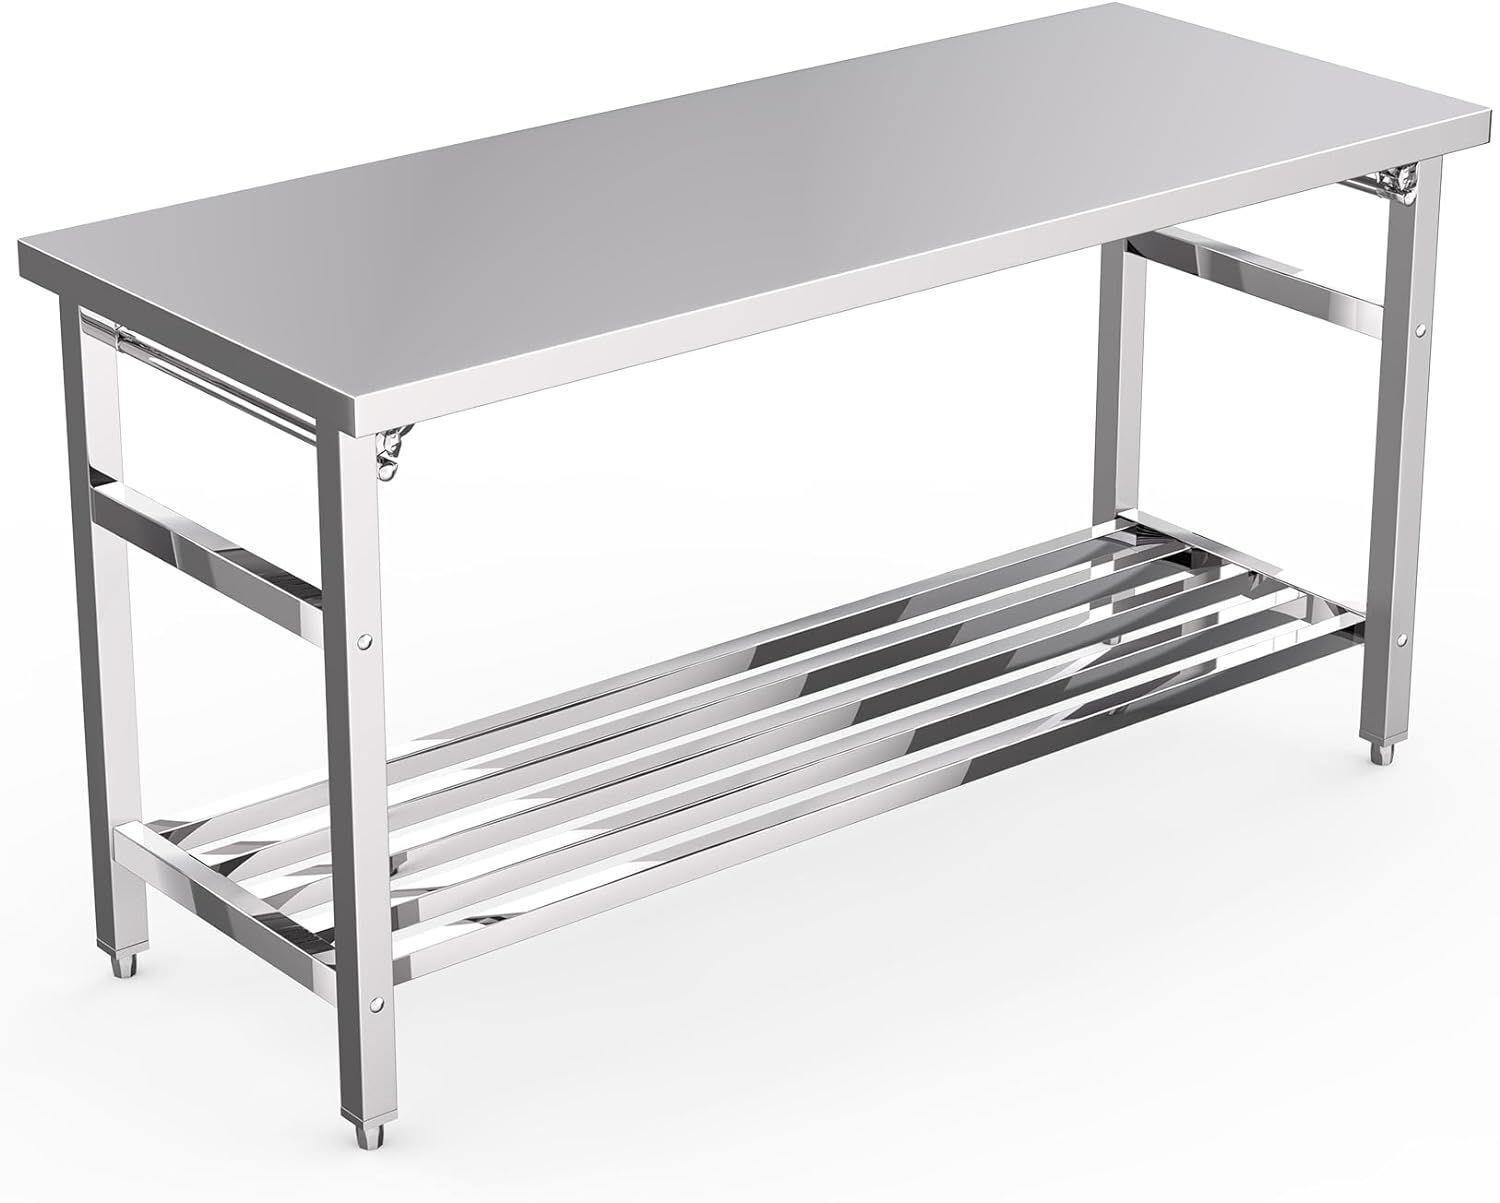 Stainless Steel Table, 24 x 60 Inches